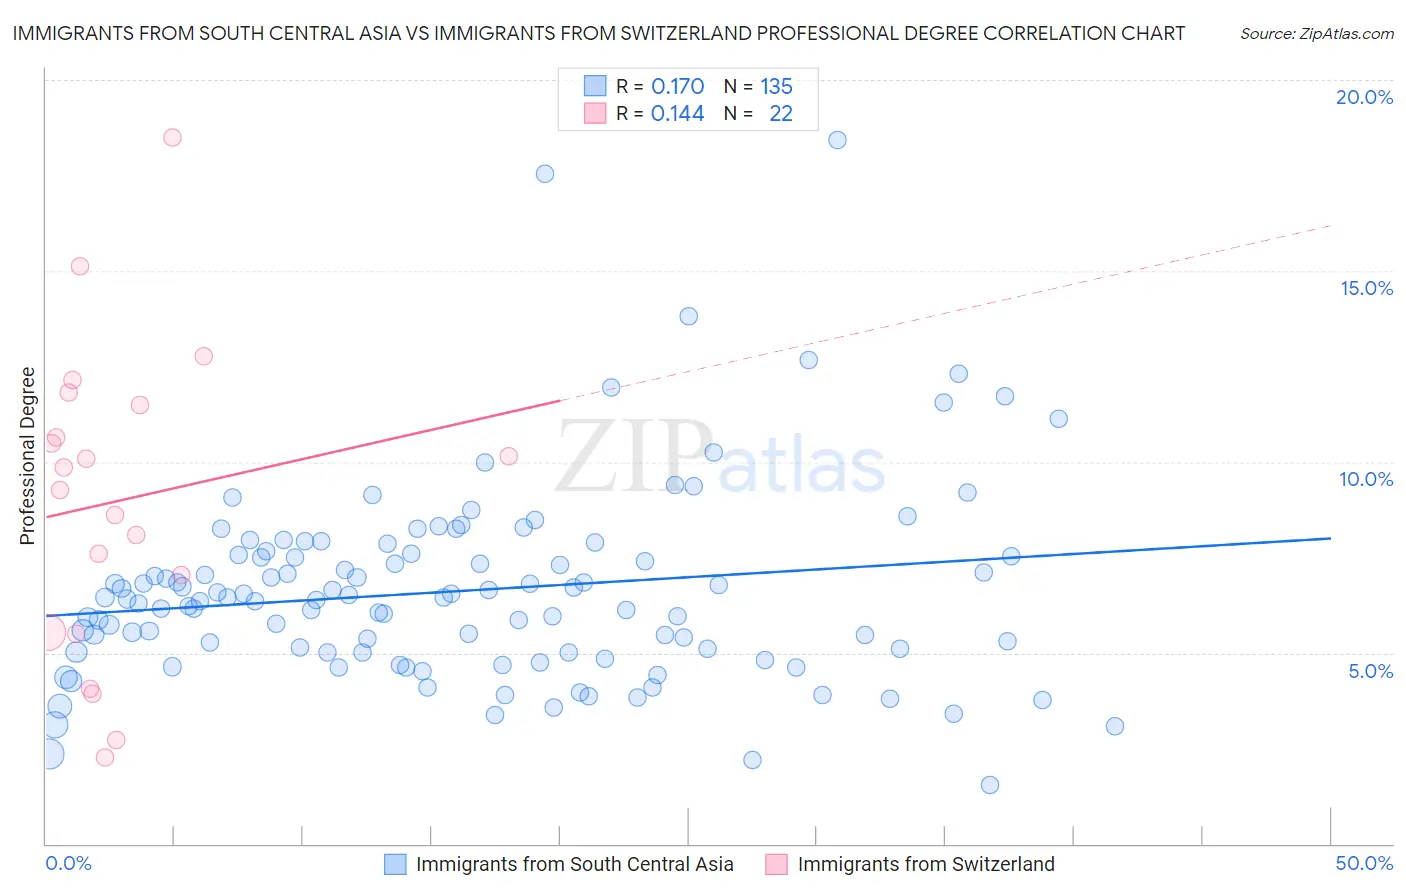 Immigrants from South Central Asia vs Immigrants from Switzerland Professional Degree